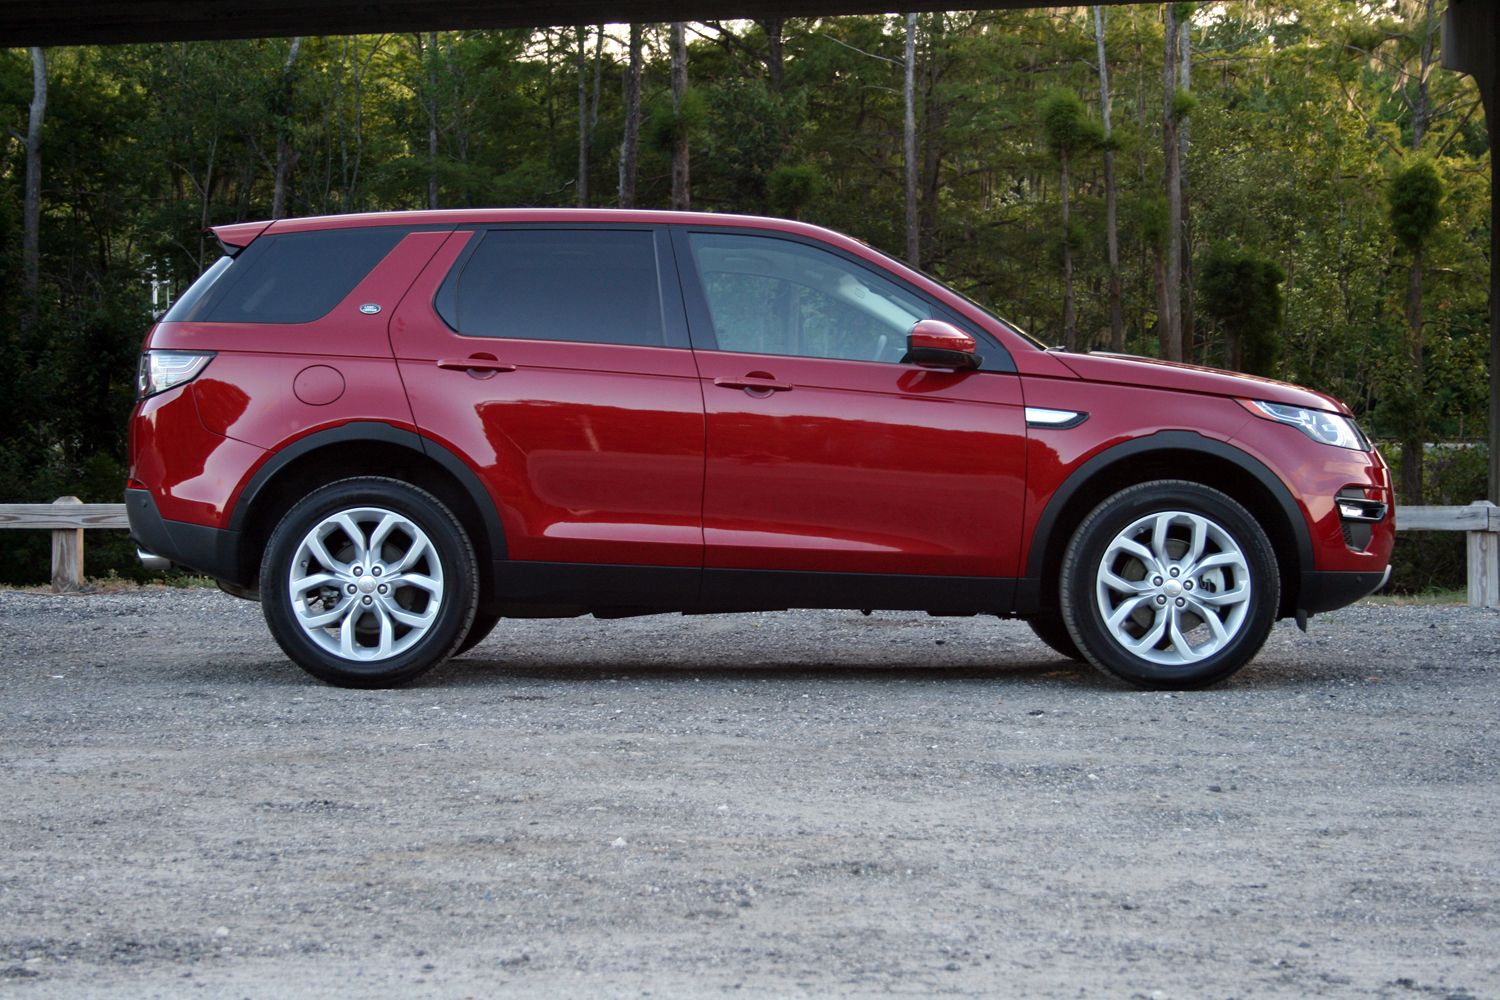 2015 Land Rover Discovery Sport - Driven